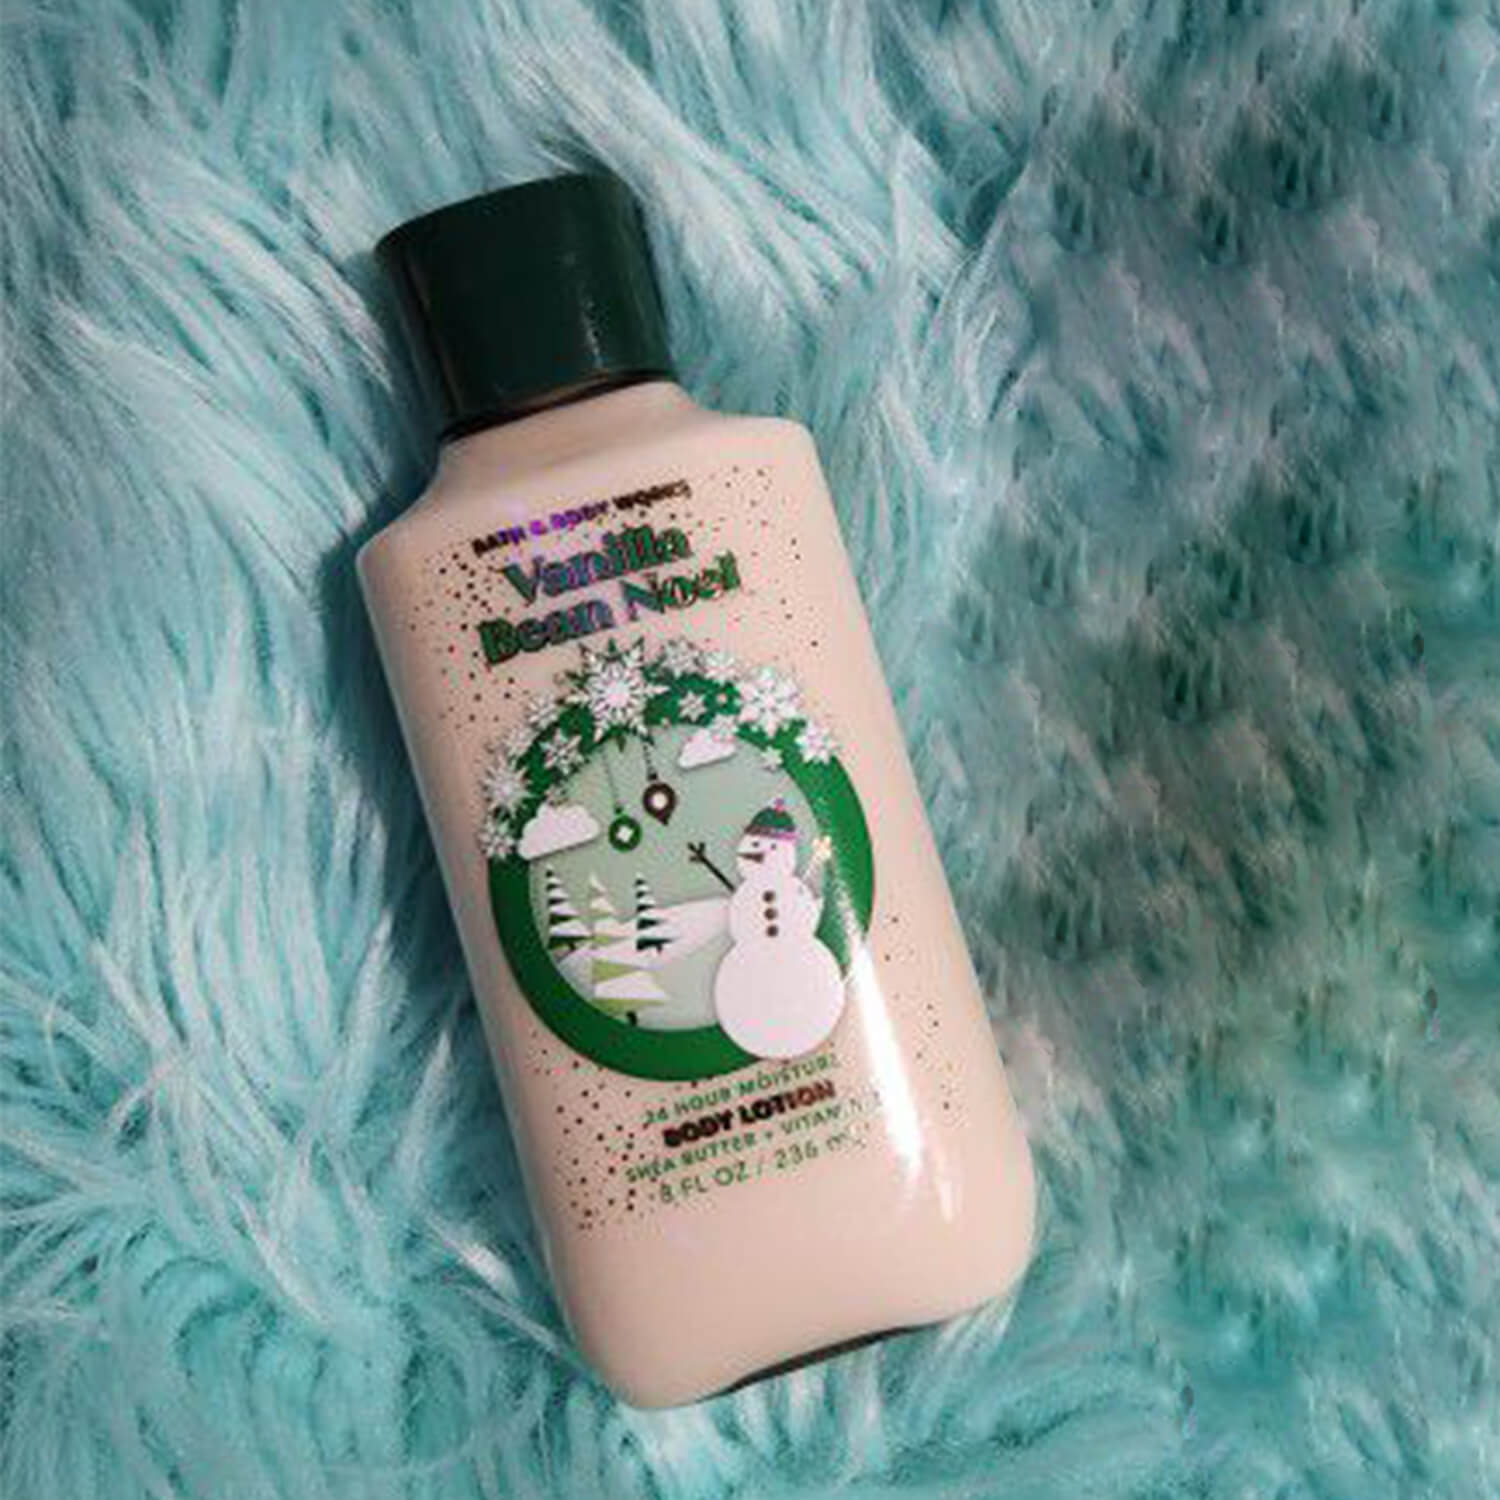 Bath & Body Works Body lotion vanilla bean available at Heygirl.pk for delivery in Karachi, Lahore, Islamabad across Pakistan.